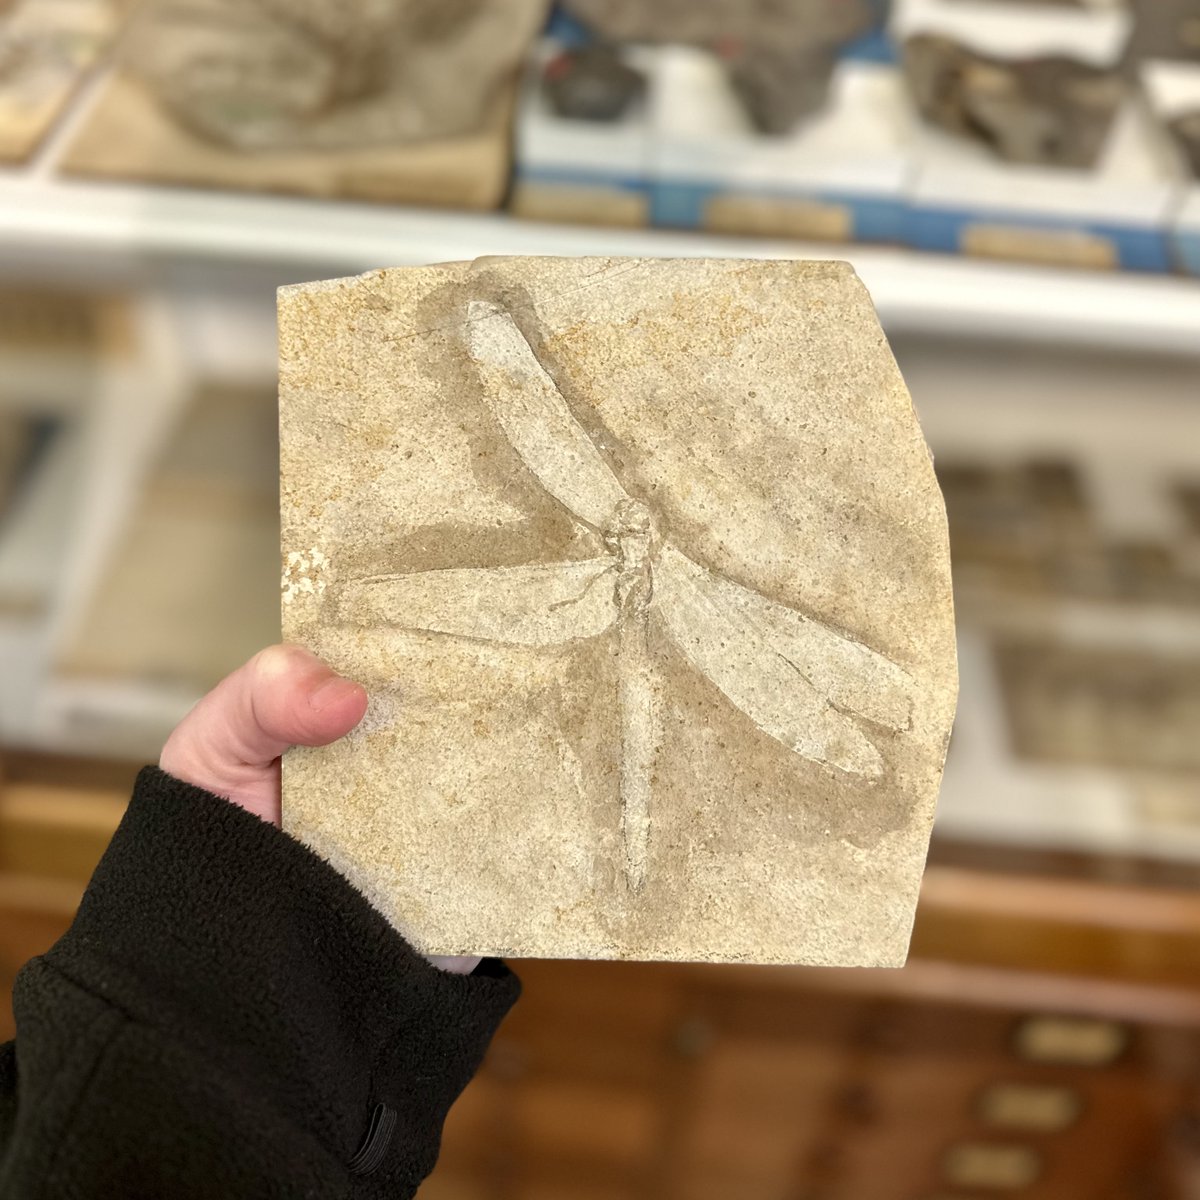 You might have heard of insects being preserved in amber, but did you know that insects can be fossilised too? You can find this beautifully detailed dragonfly fossil in our museum. This one is from the late Jurassic Period and is around 155 million years old! #Fossilfriday